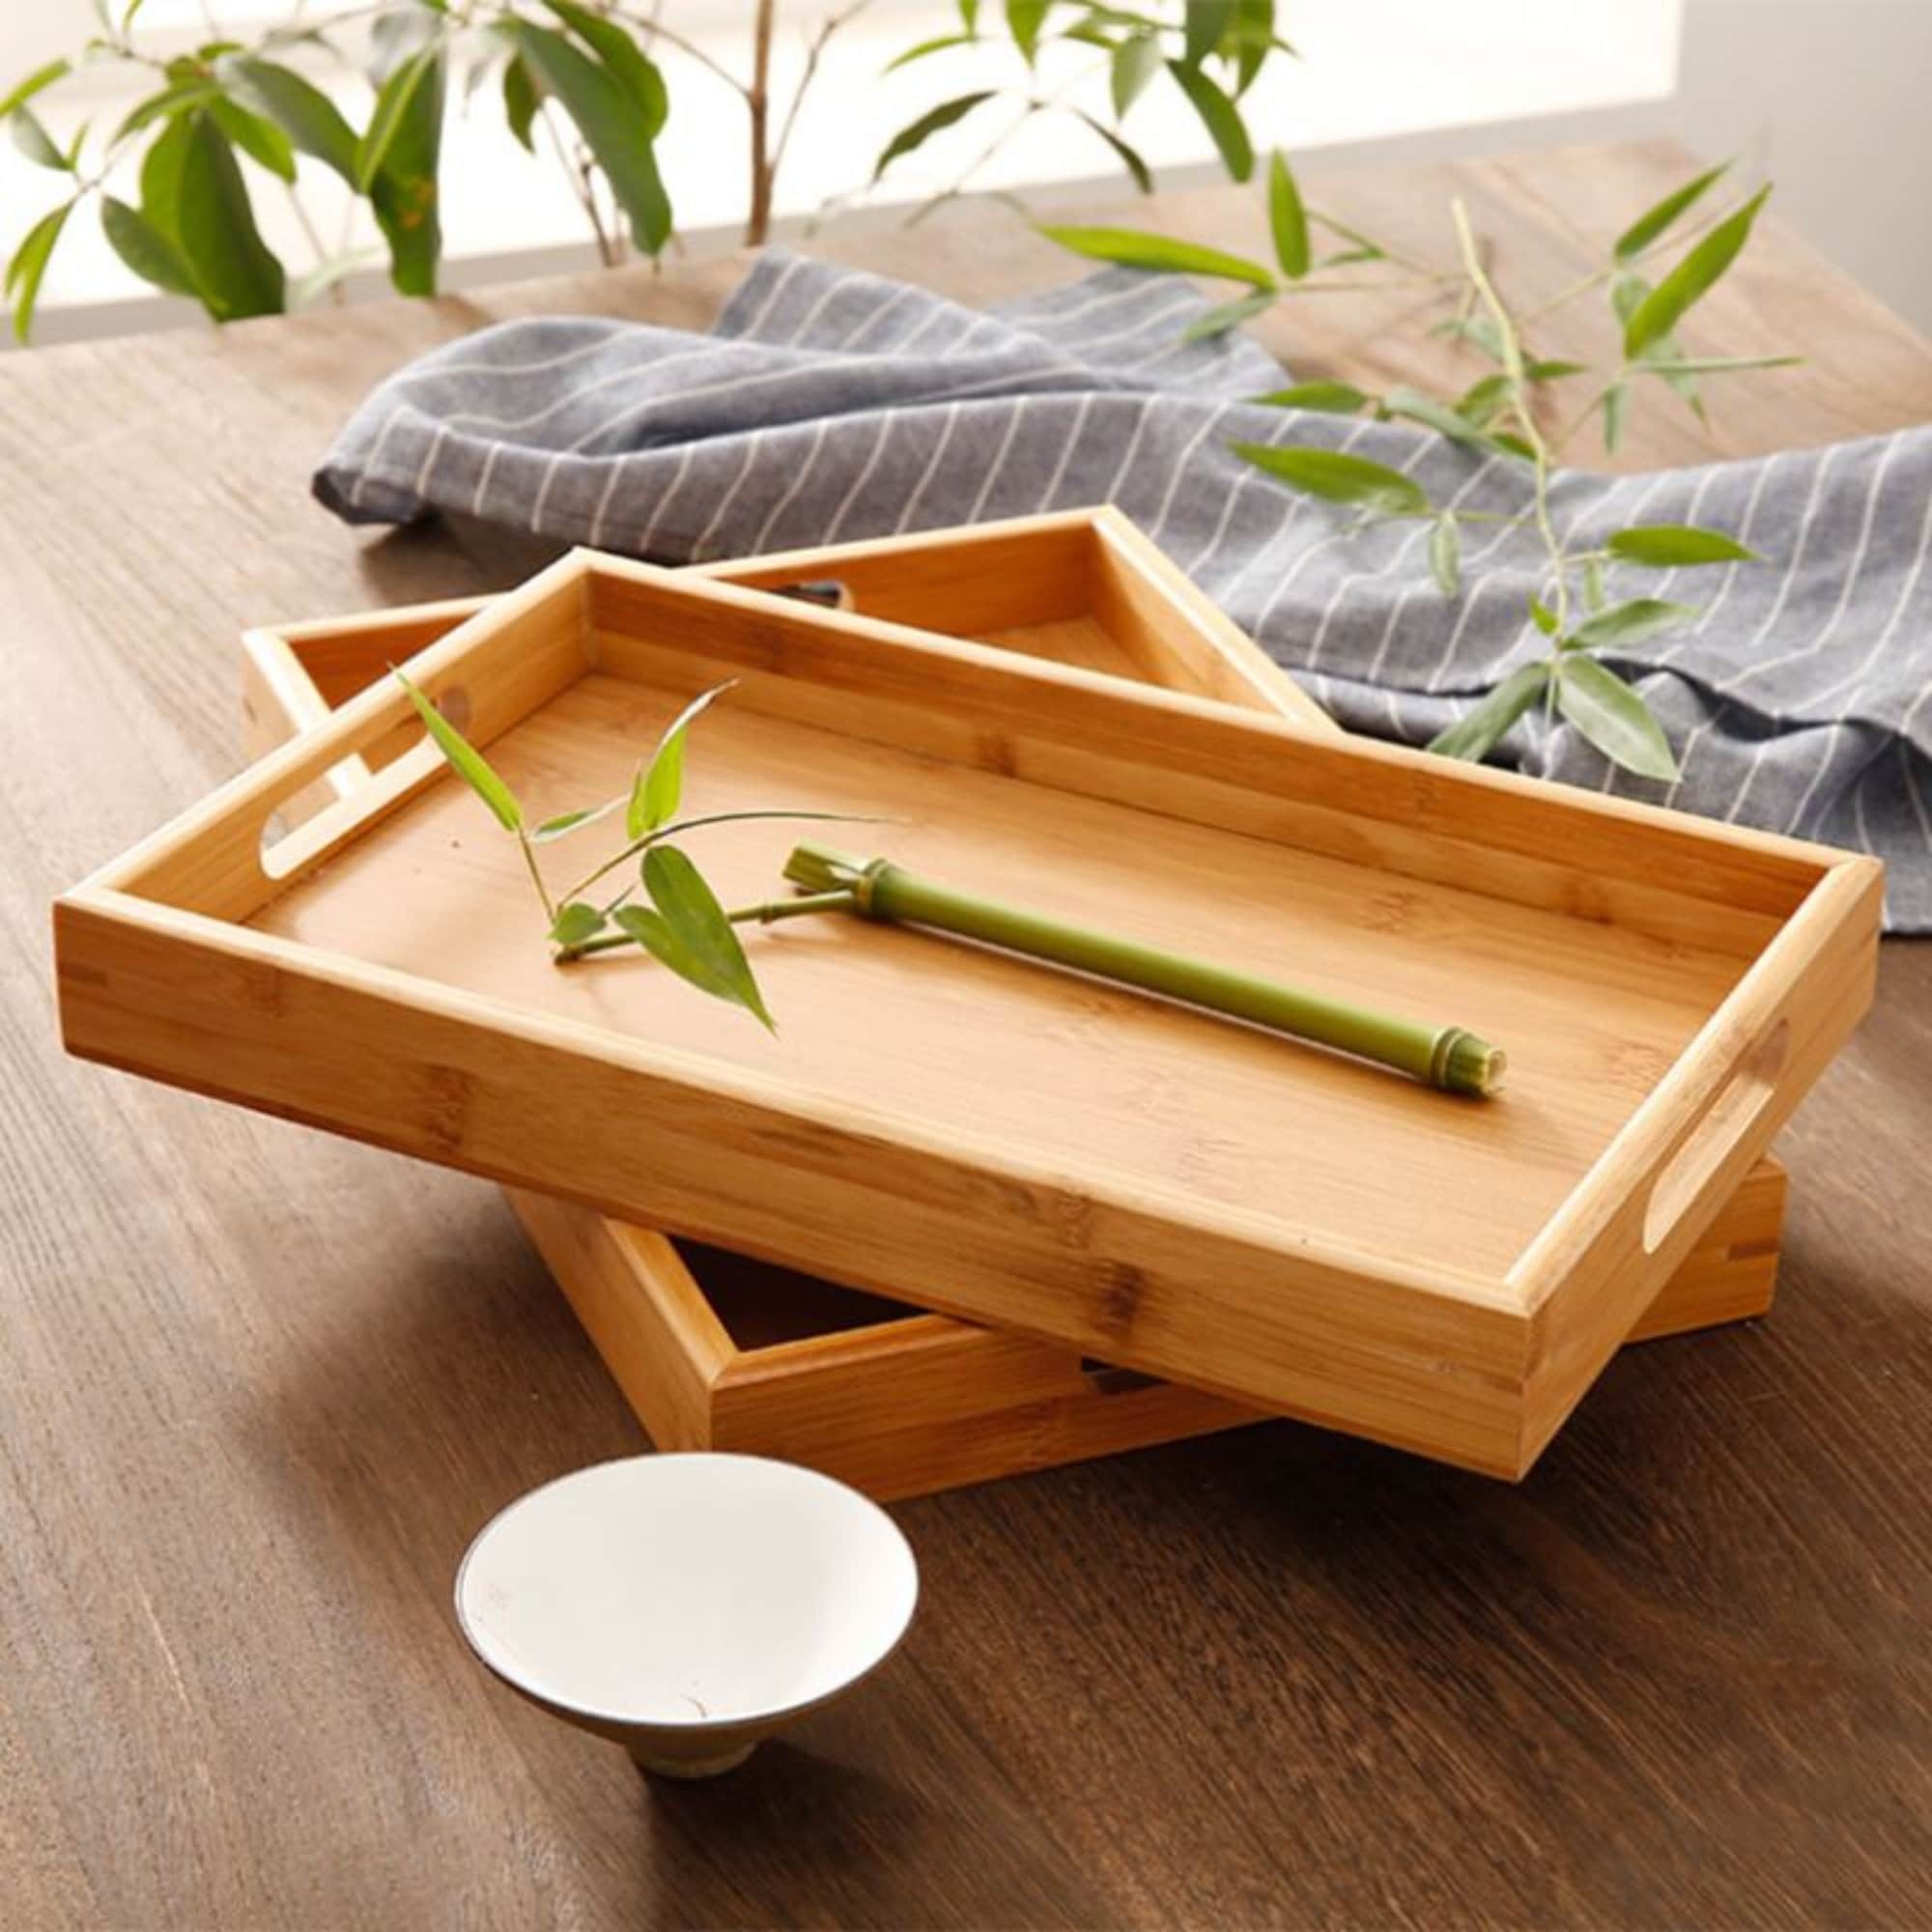 Bamboo Trays Care Guide